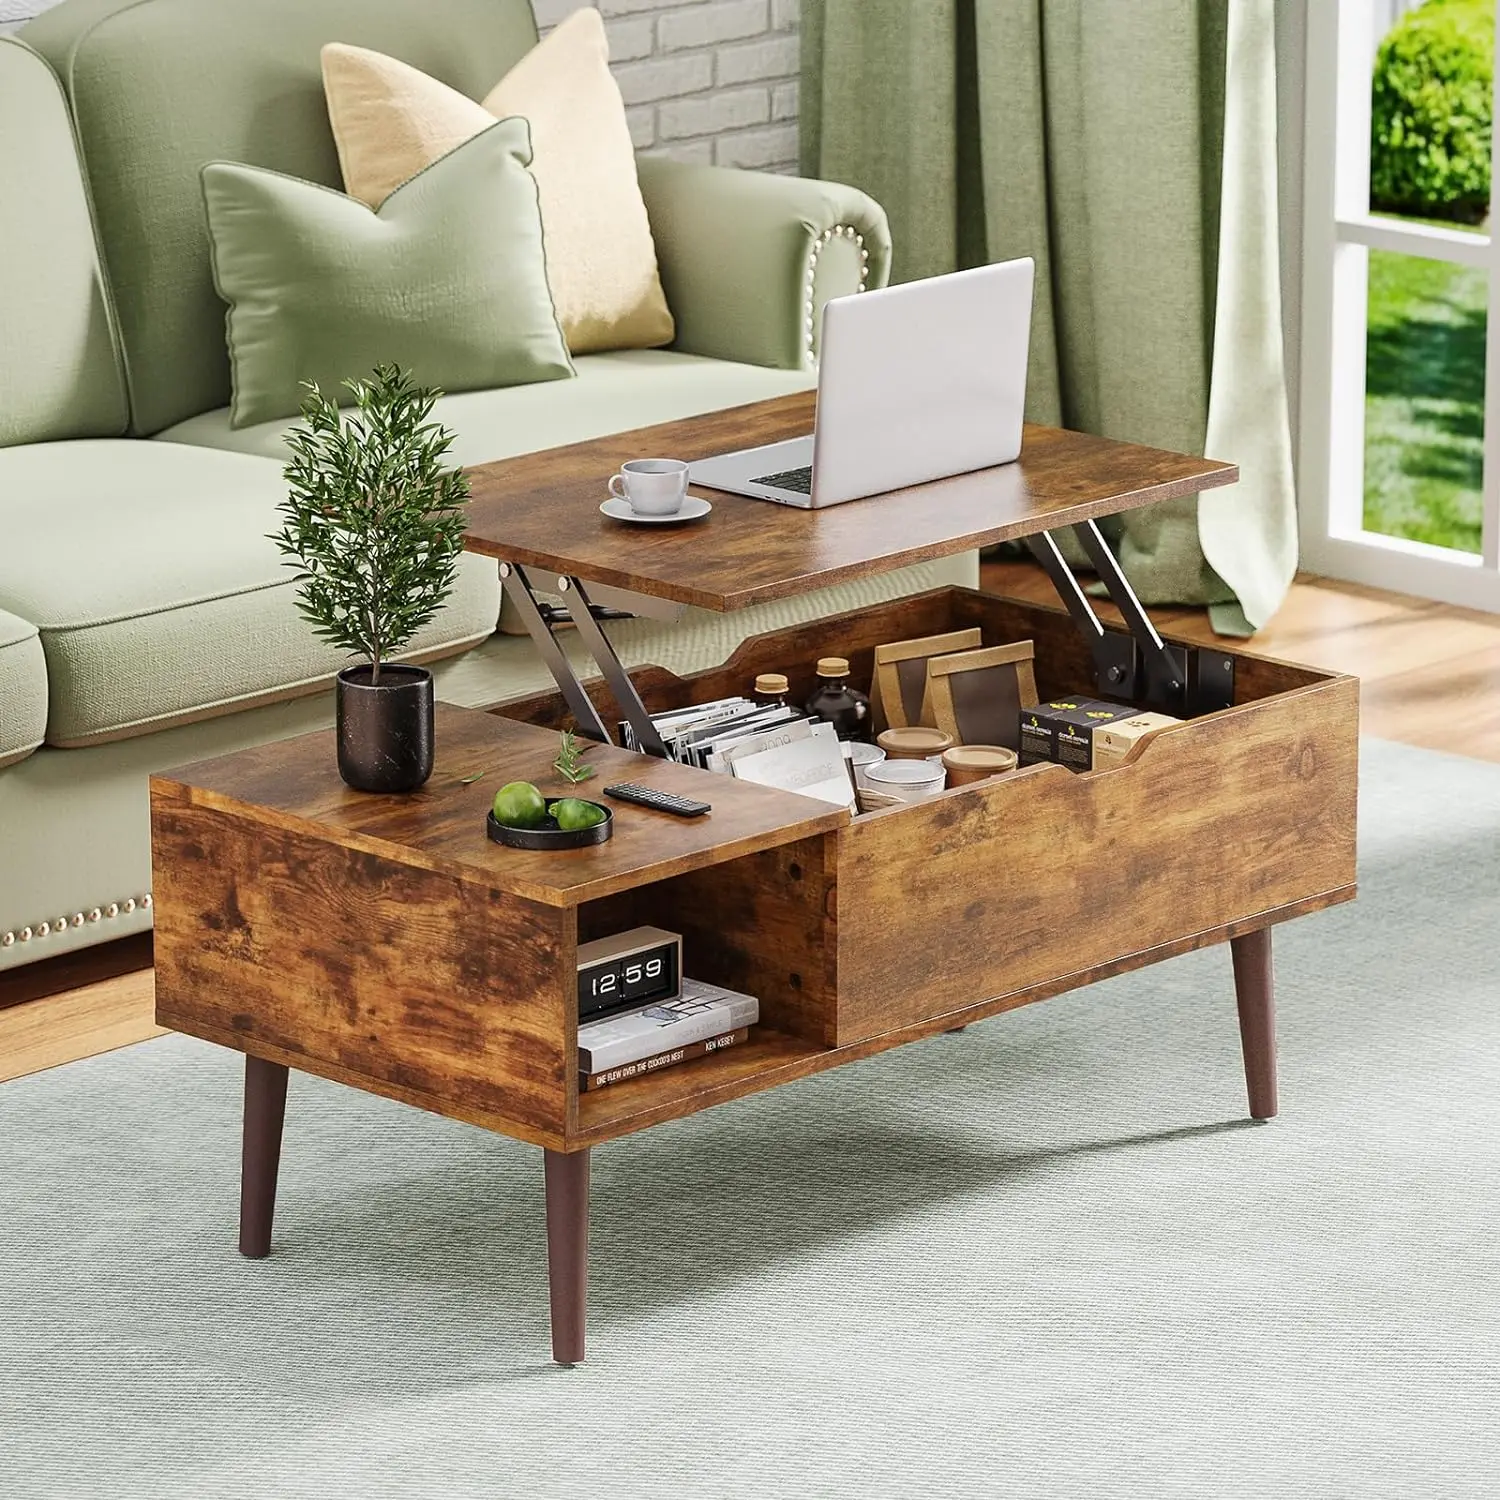 

OLIXIS Coffee Tables, Small Coffee Table with Storage Shelf and Hidden Compartment, Modern Wood Lift Top Coffee Table